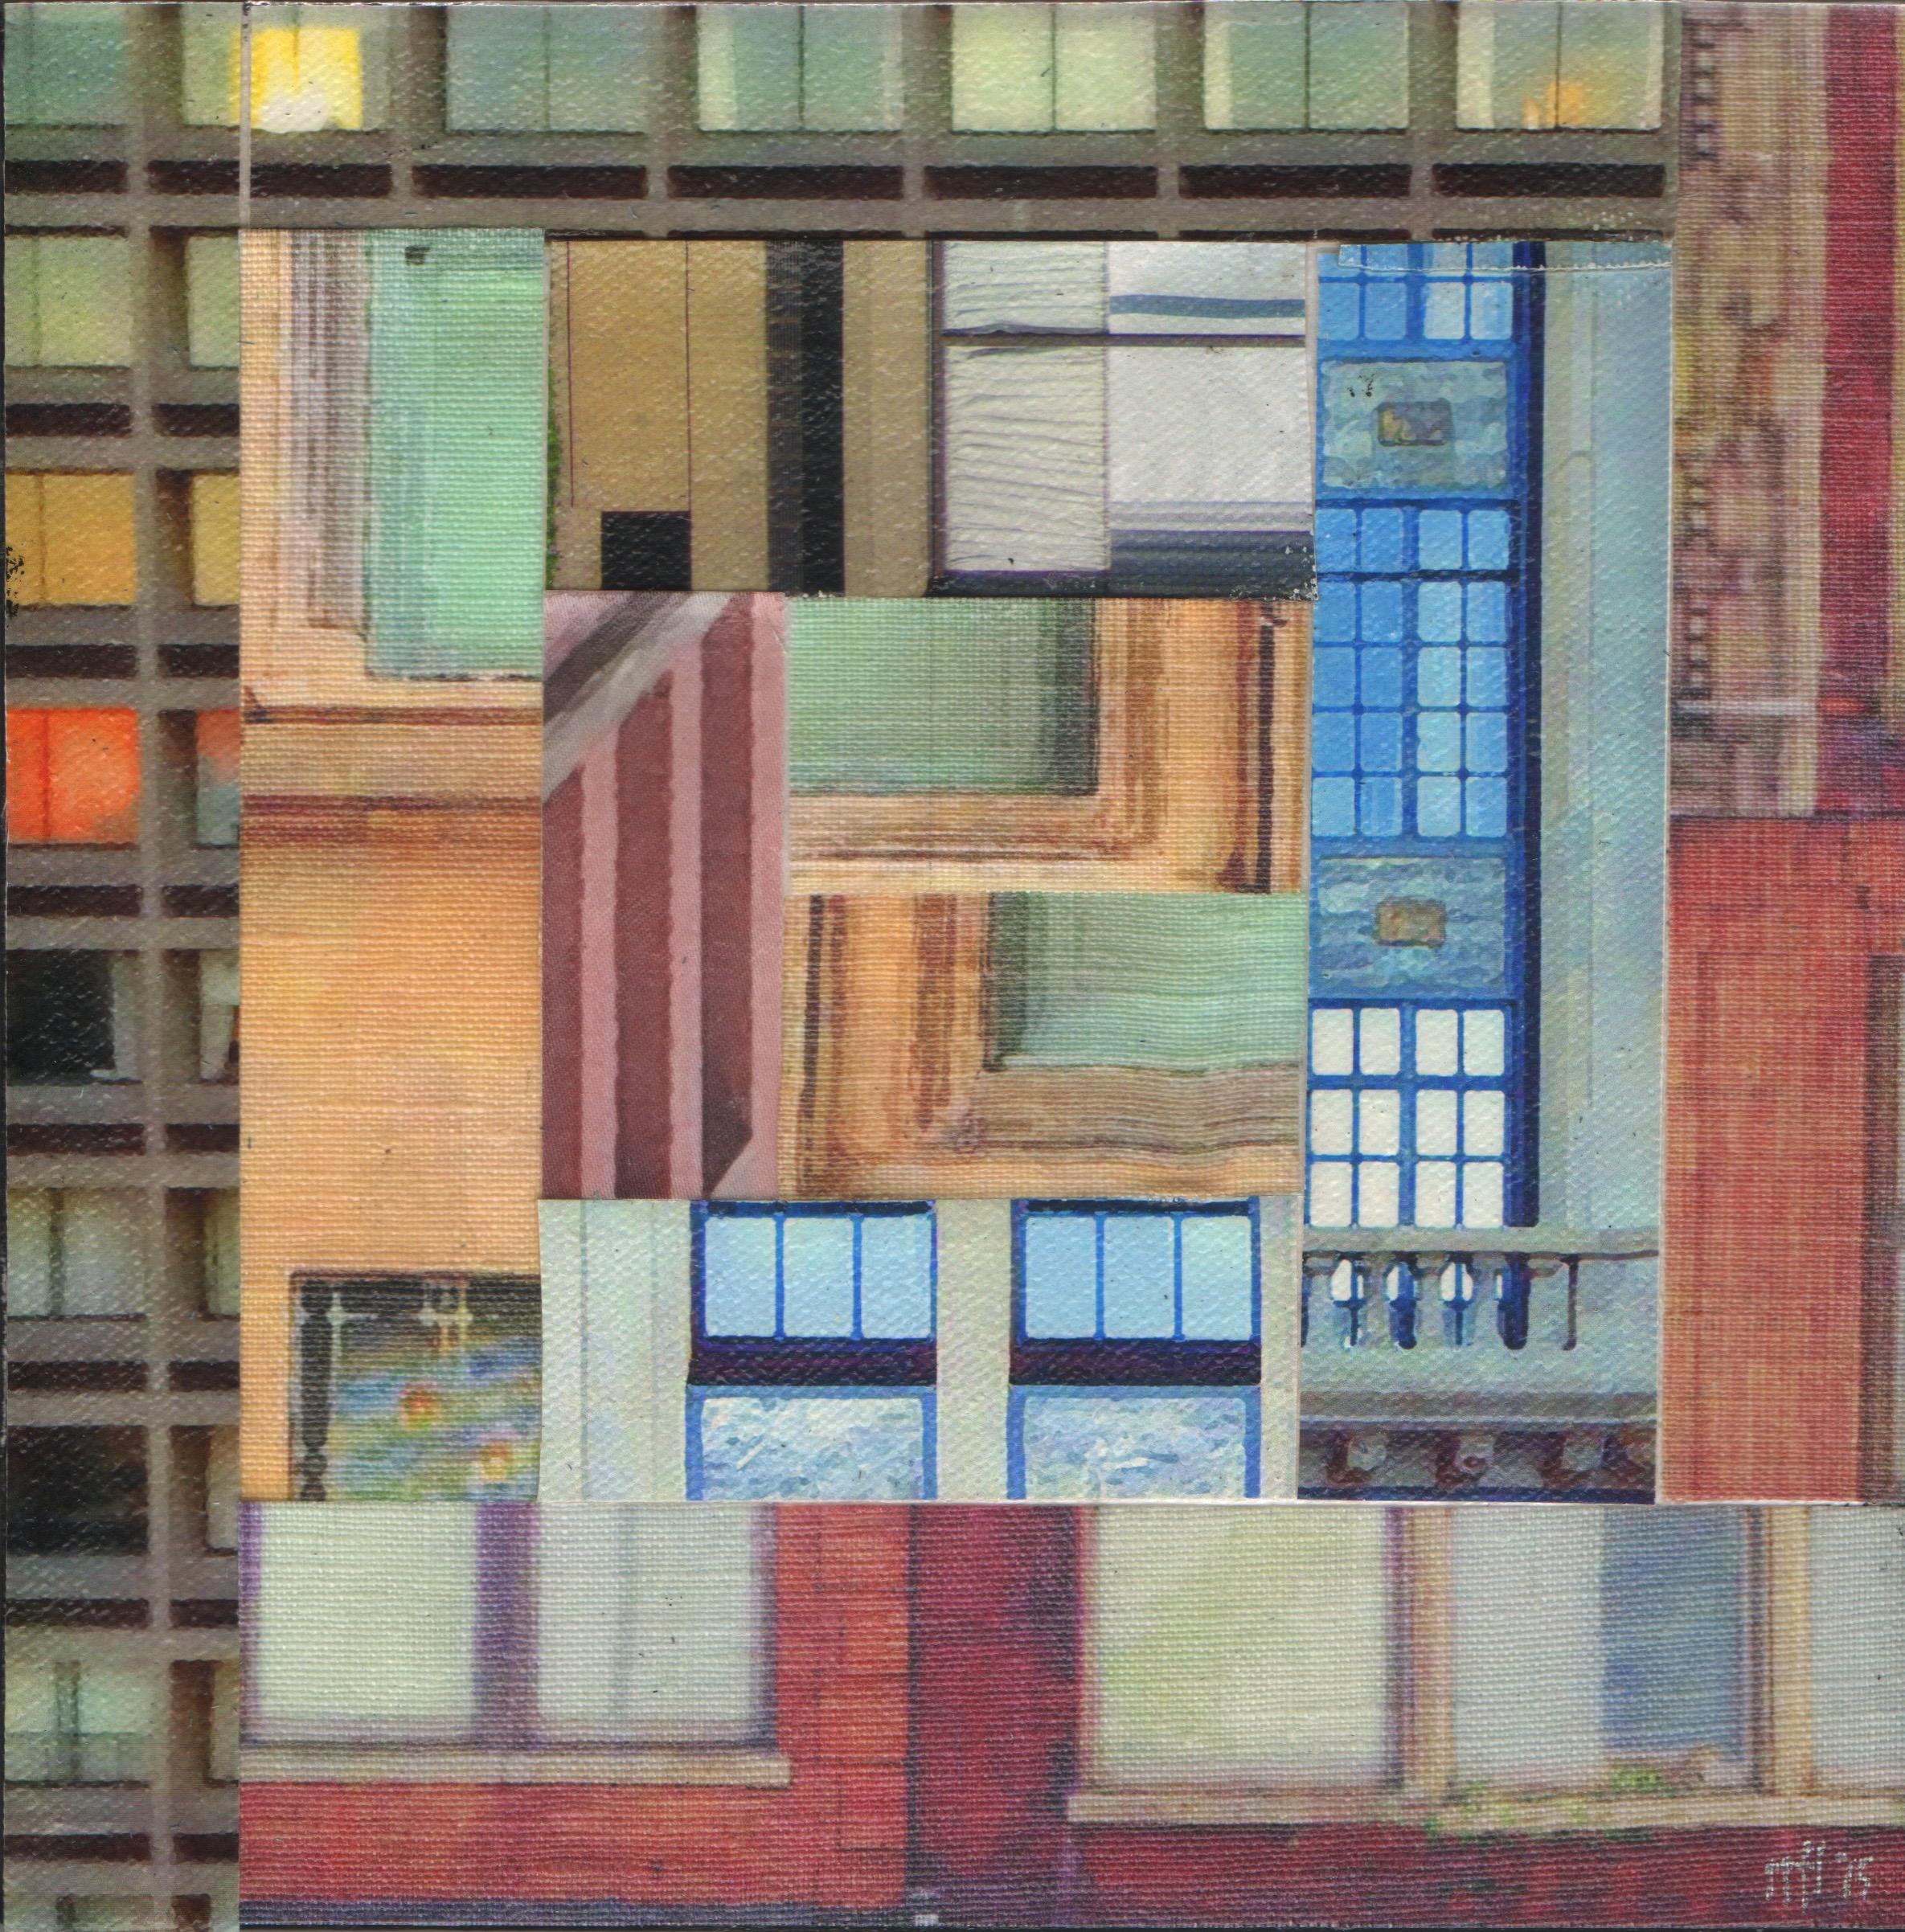 Patchwork City 7, Mixed Media on Canvas - Mixed Media Art by Marilyn Henrion